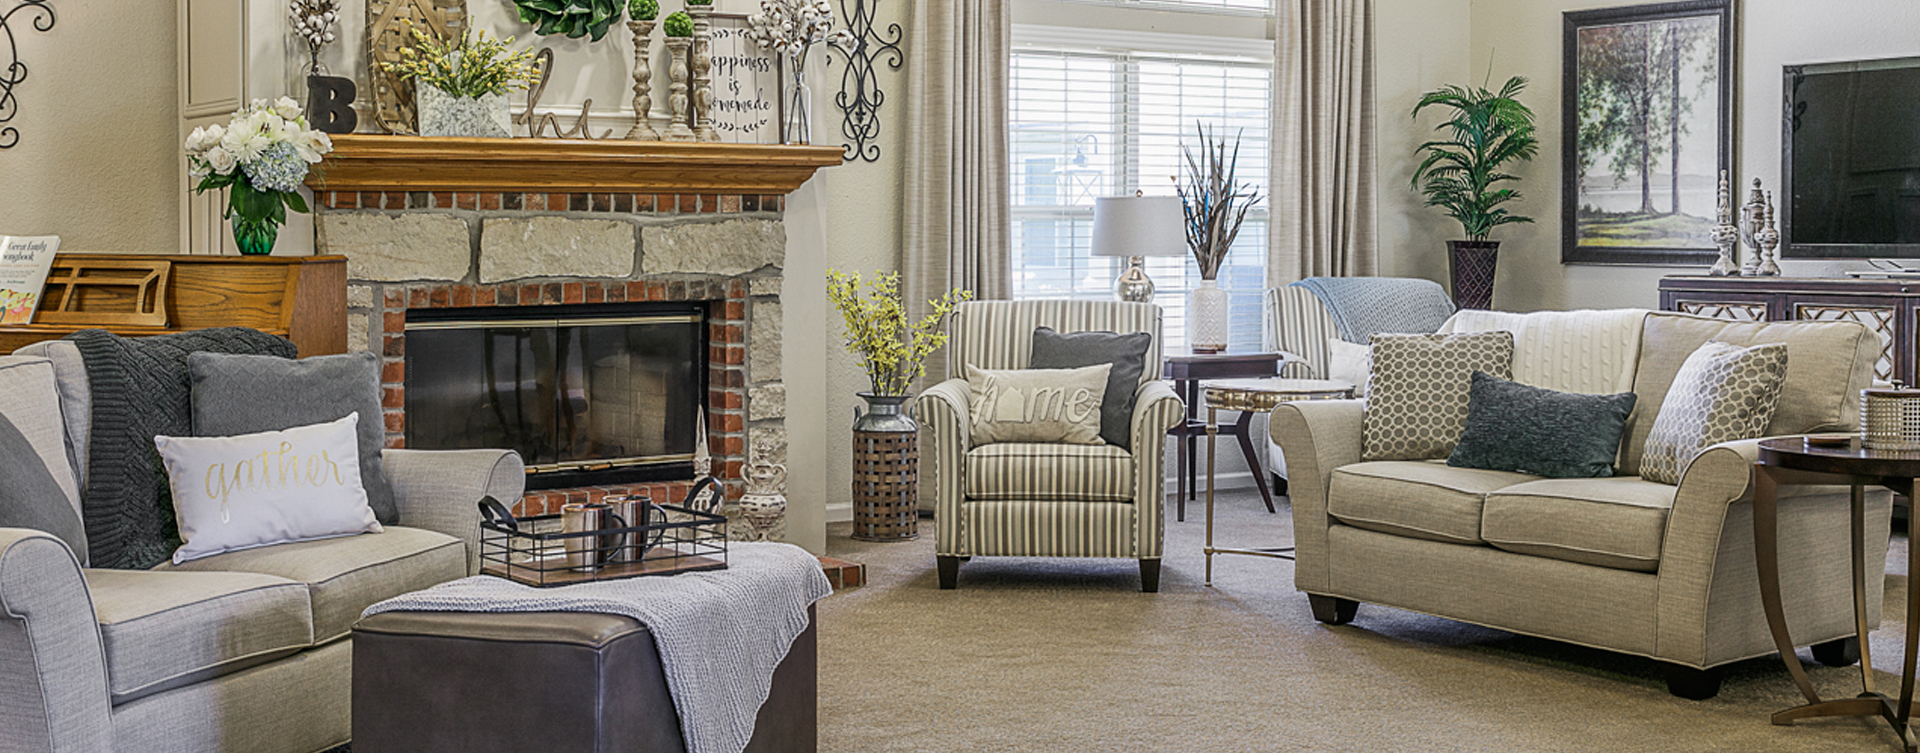 Snooze in your favorite chair in the living room at Bickford of Marshalltown